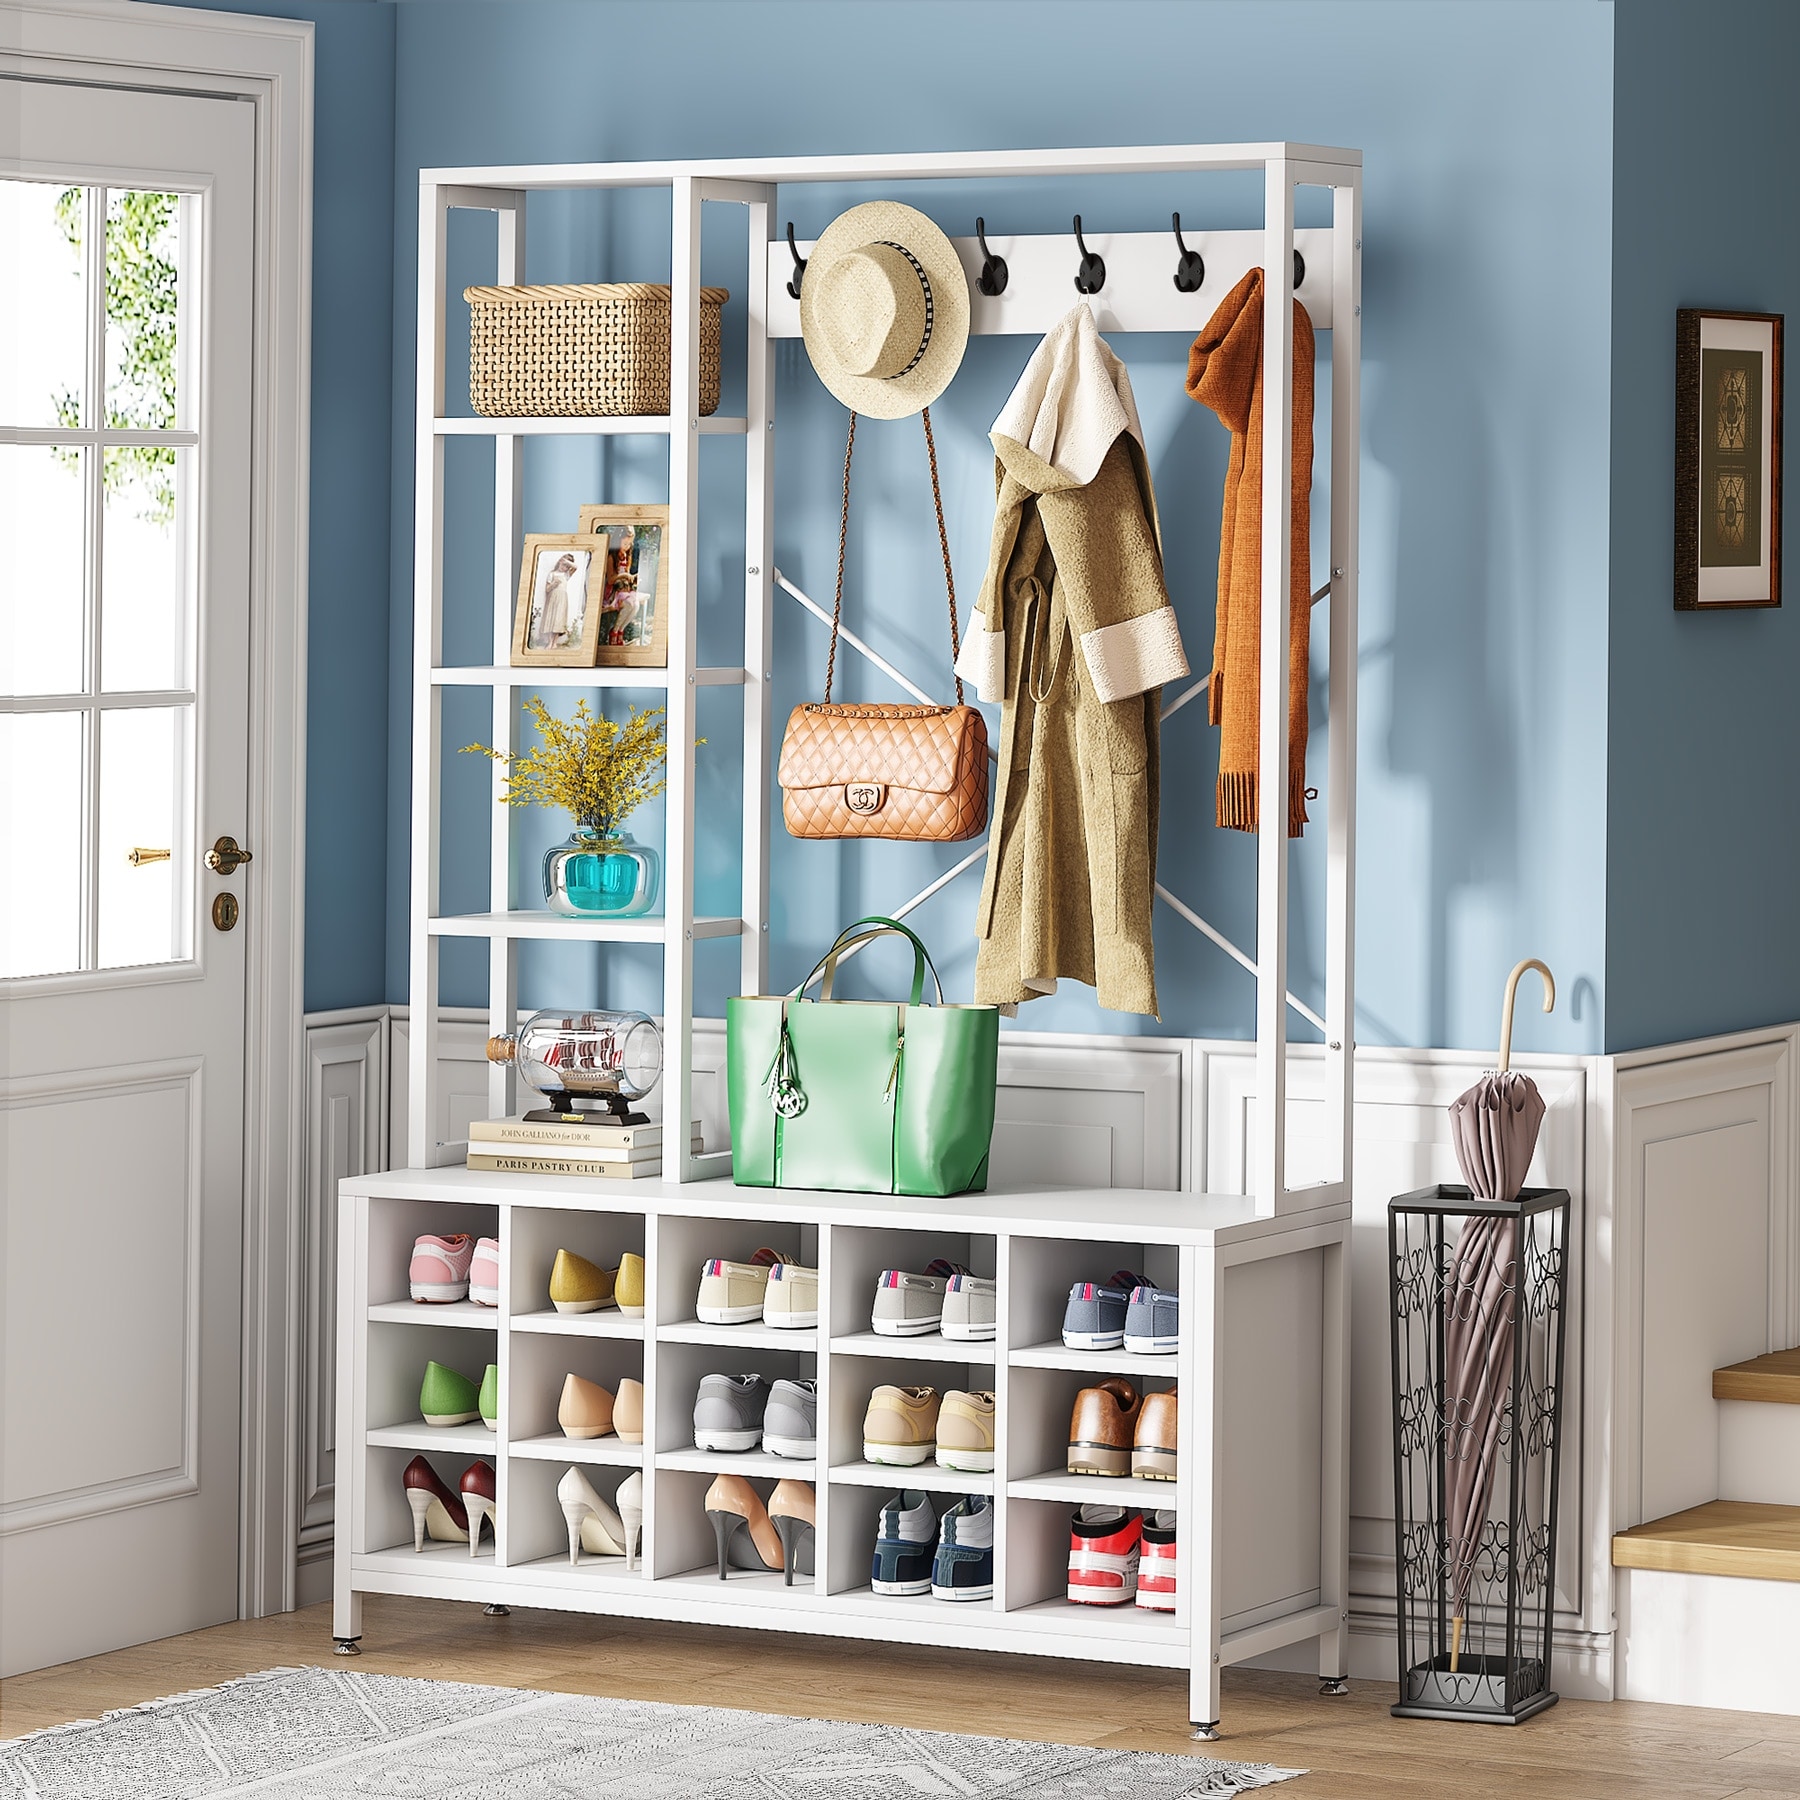 https://ak1.ostkcdn.com/images/products/is/images/direct/c0cc5e0be50637589bdecfbf52cbdbe8788d862b/Entryway-Hall-Tree-with-Bench-and-Shoe-Storage-Coat-Rack.jpg